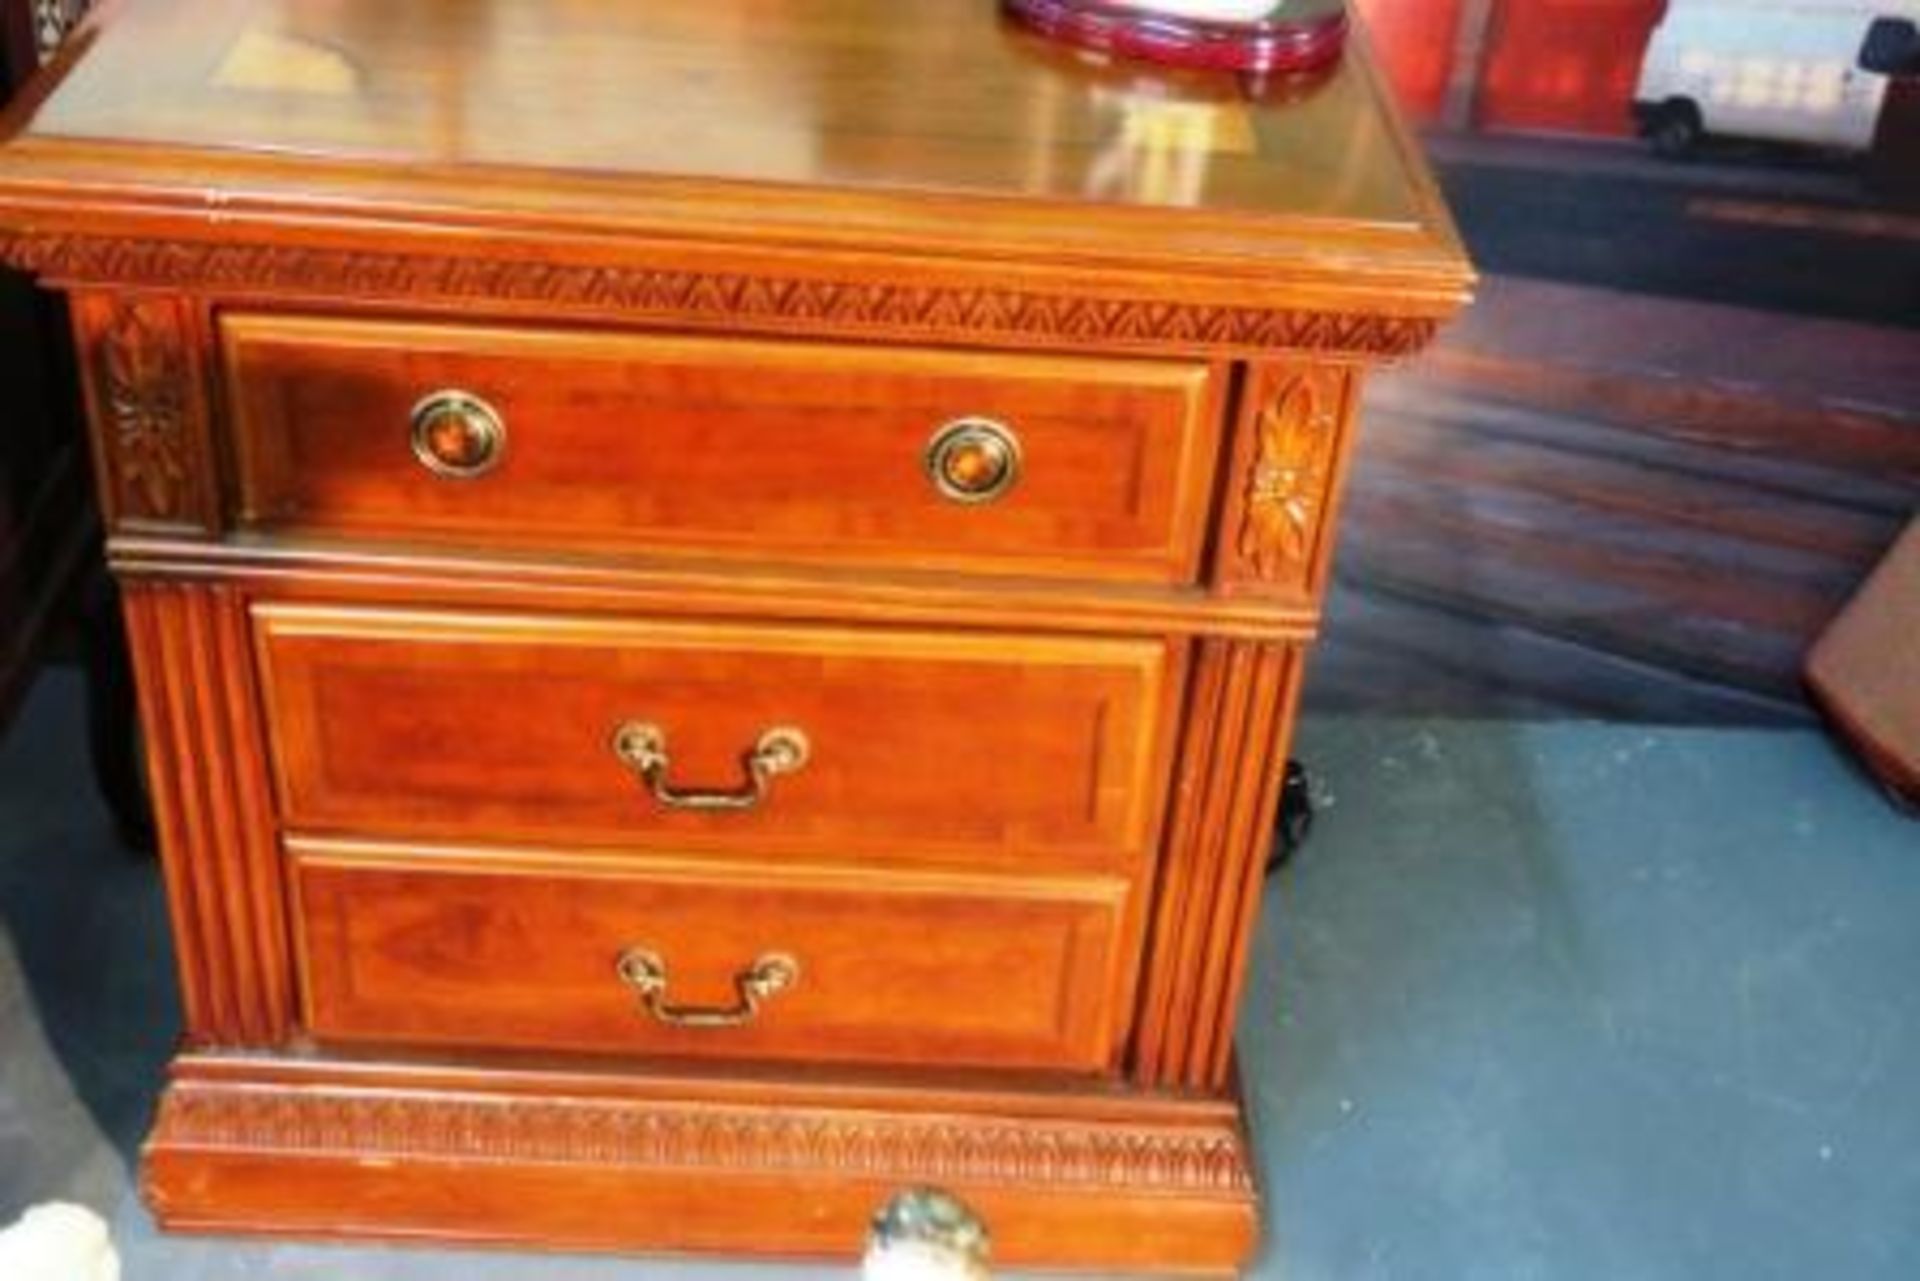 EXQUISITE SHELL INLAID CHEST OF DRAWERS - QUALITY PERIOD FURNITURE - Image 2 of 3